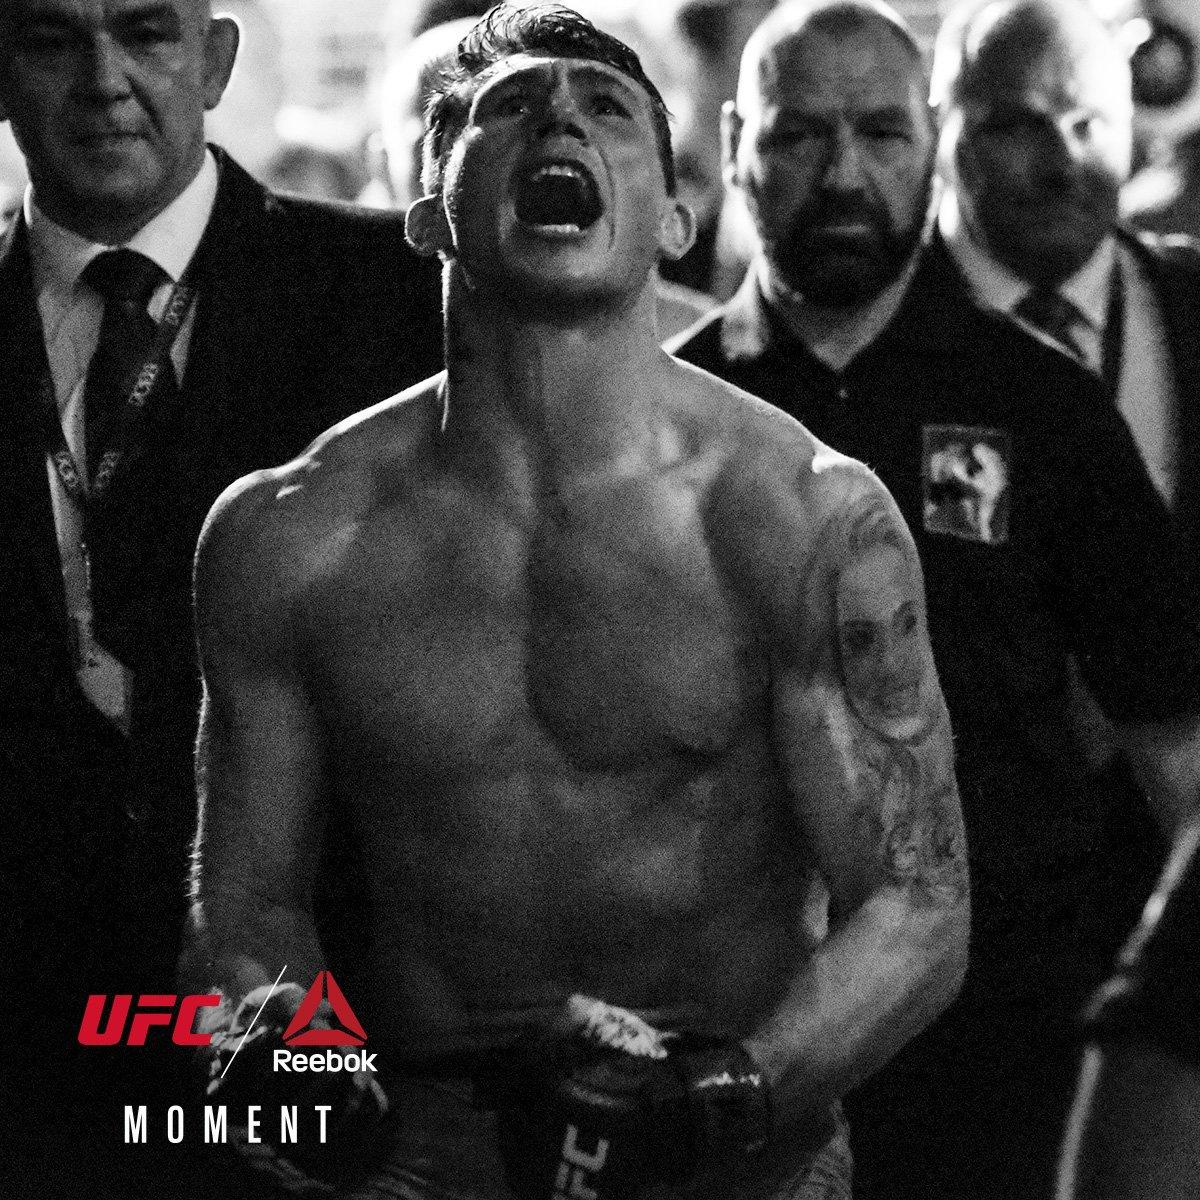 UFC be ready to seize the moment